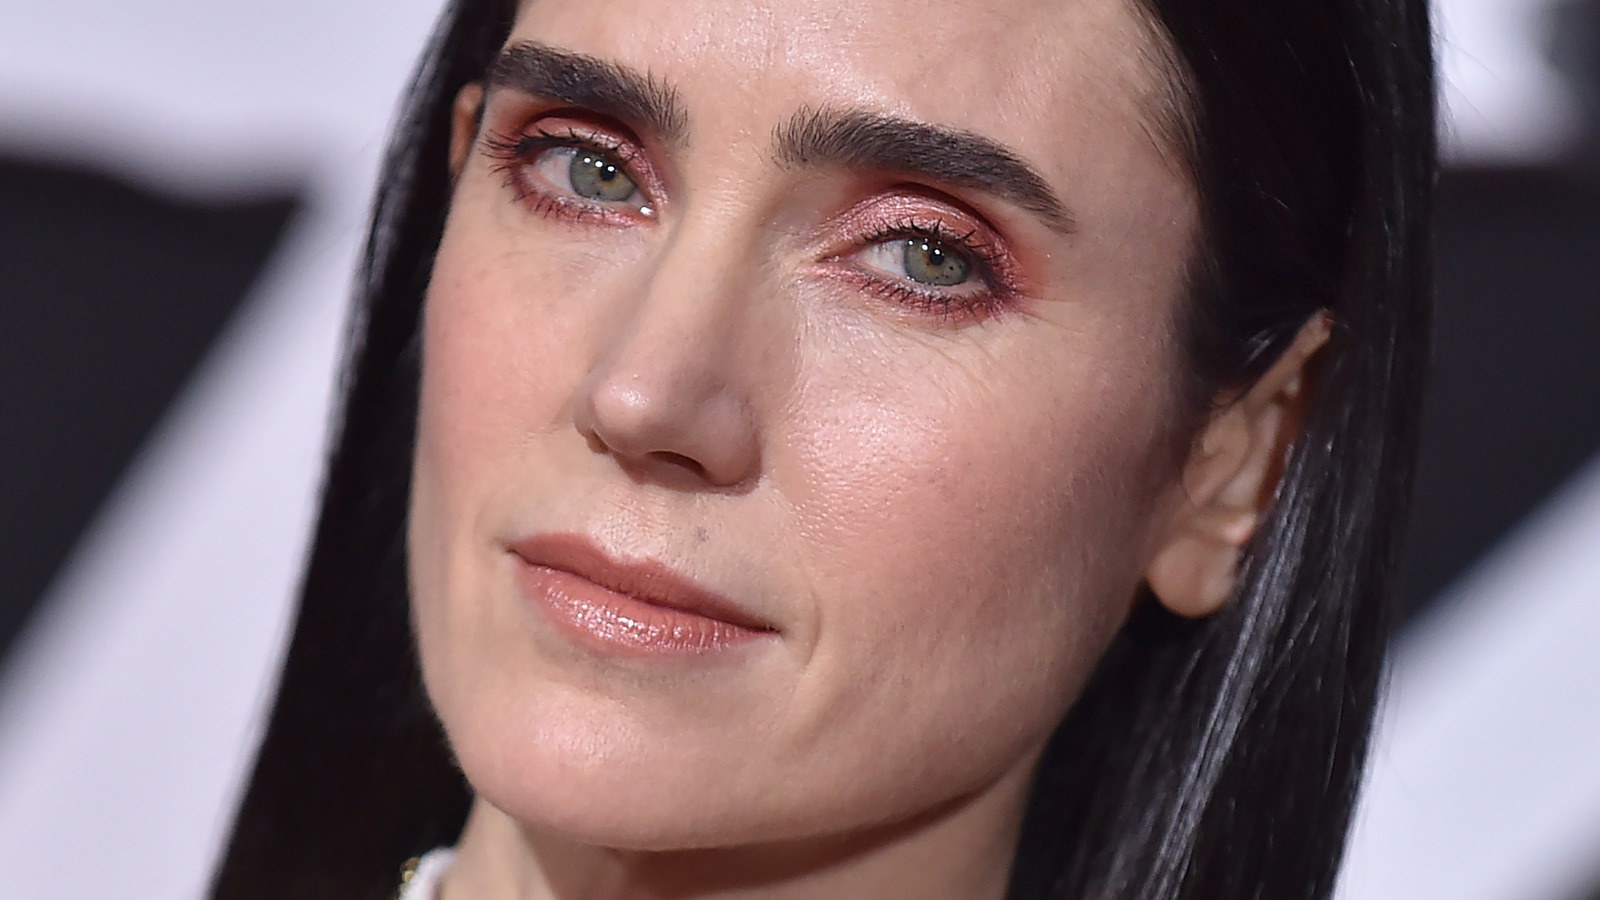 Jennifer Connelly: Her career, marriage and family life.